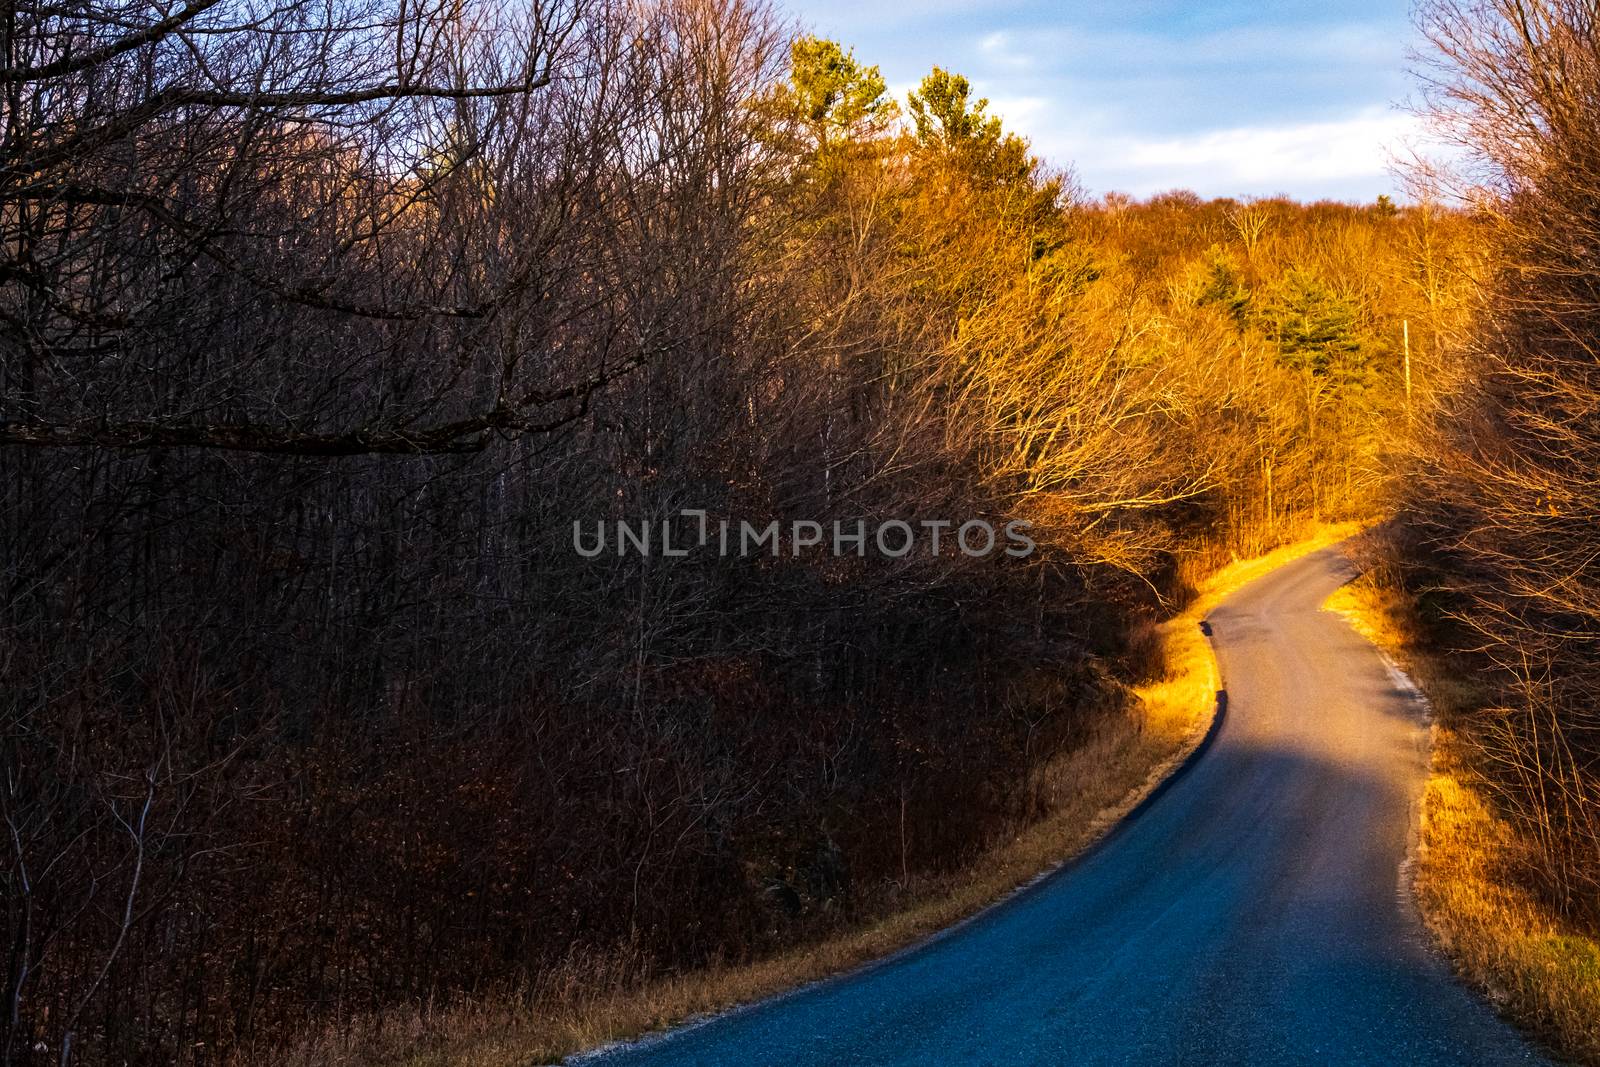 A rural road bends through the countryside, surrounded by the trees of a forest in autumn.